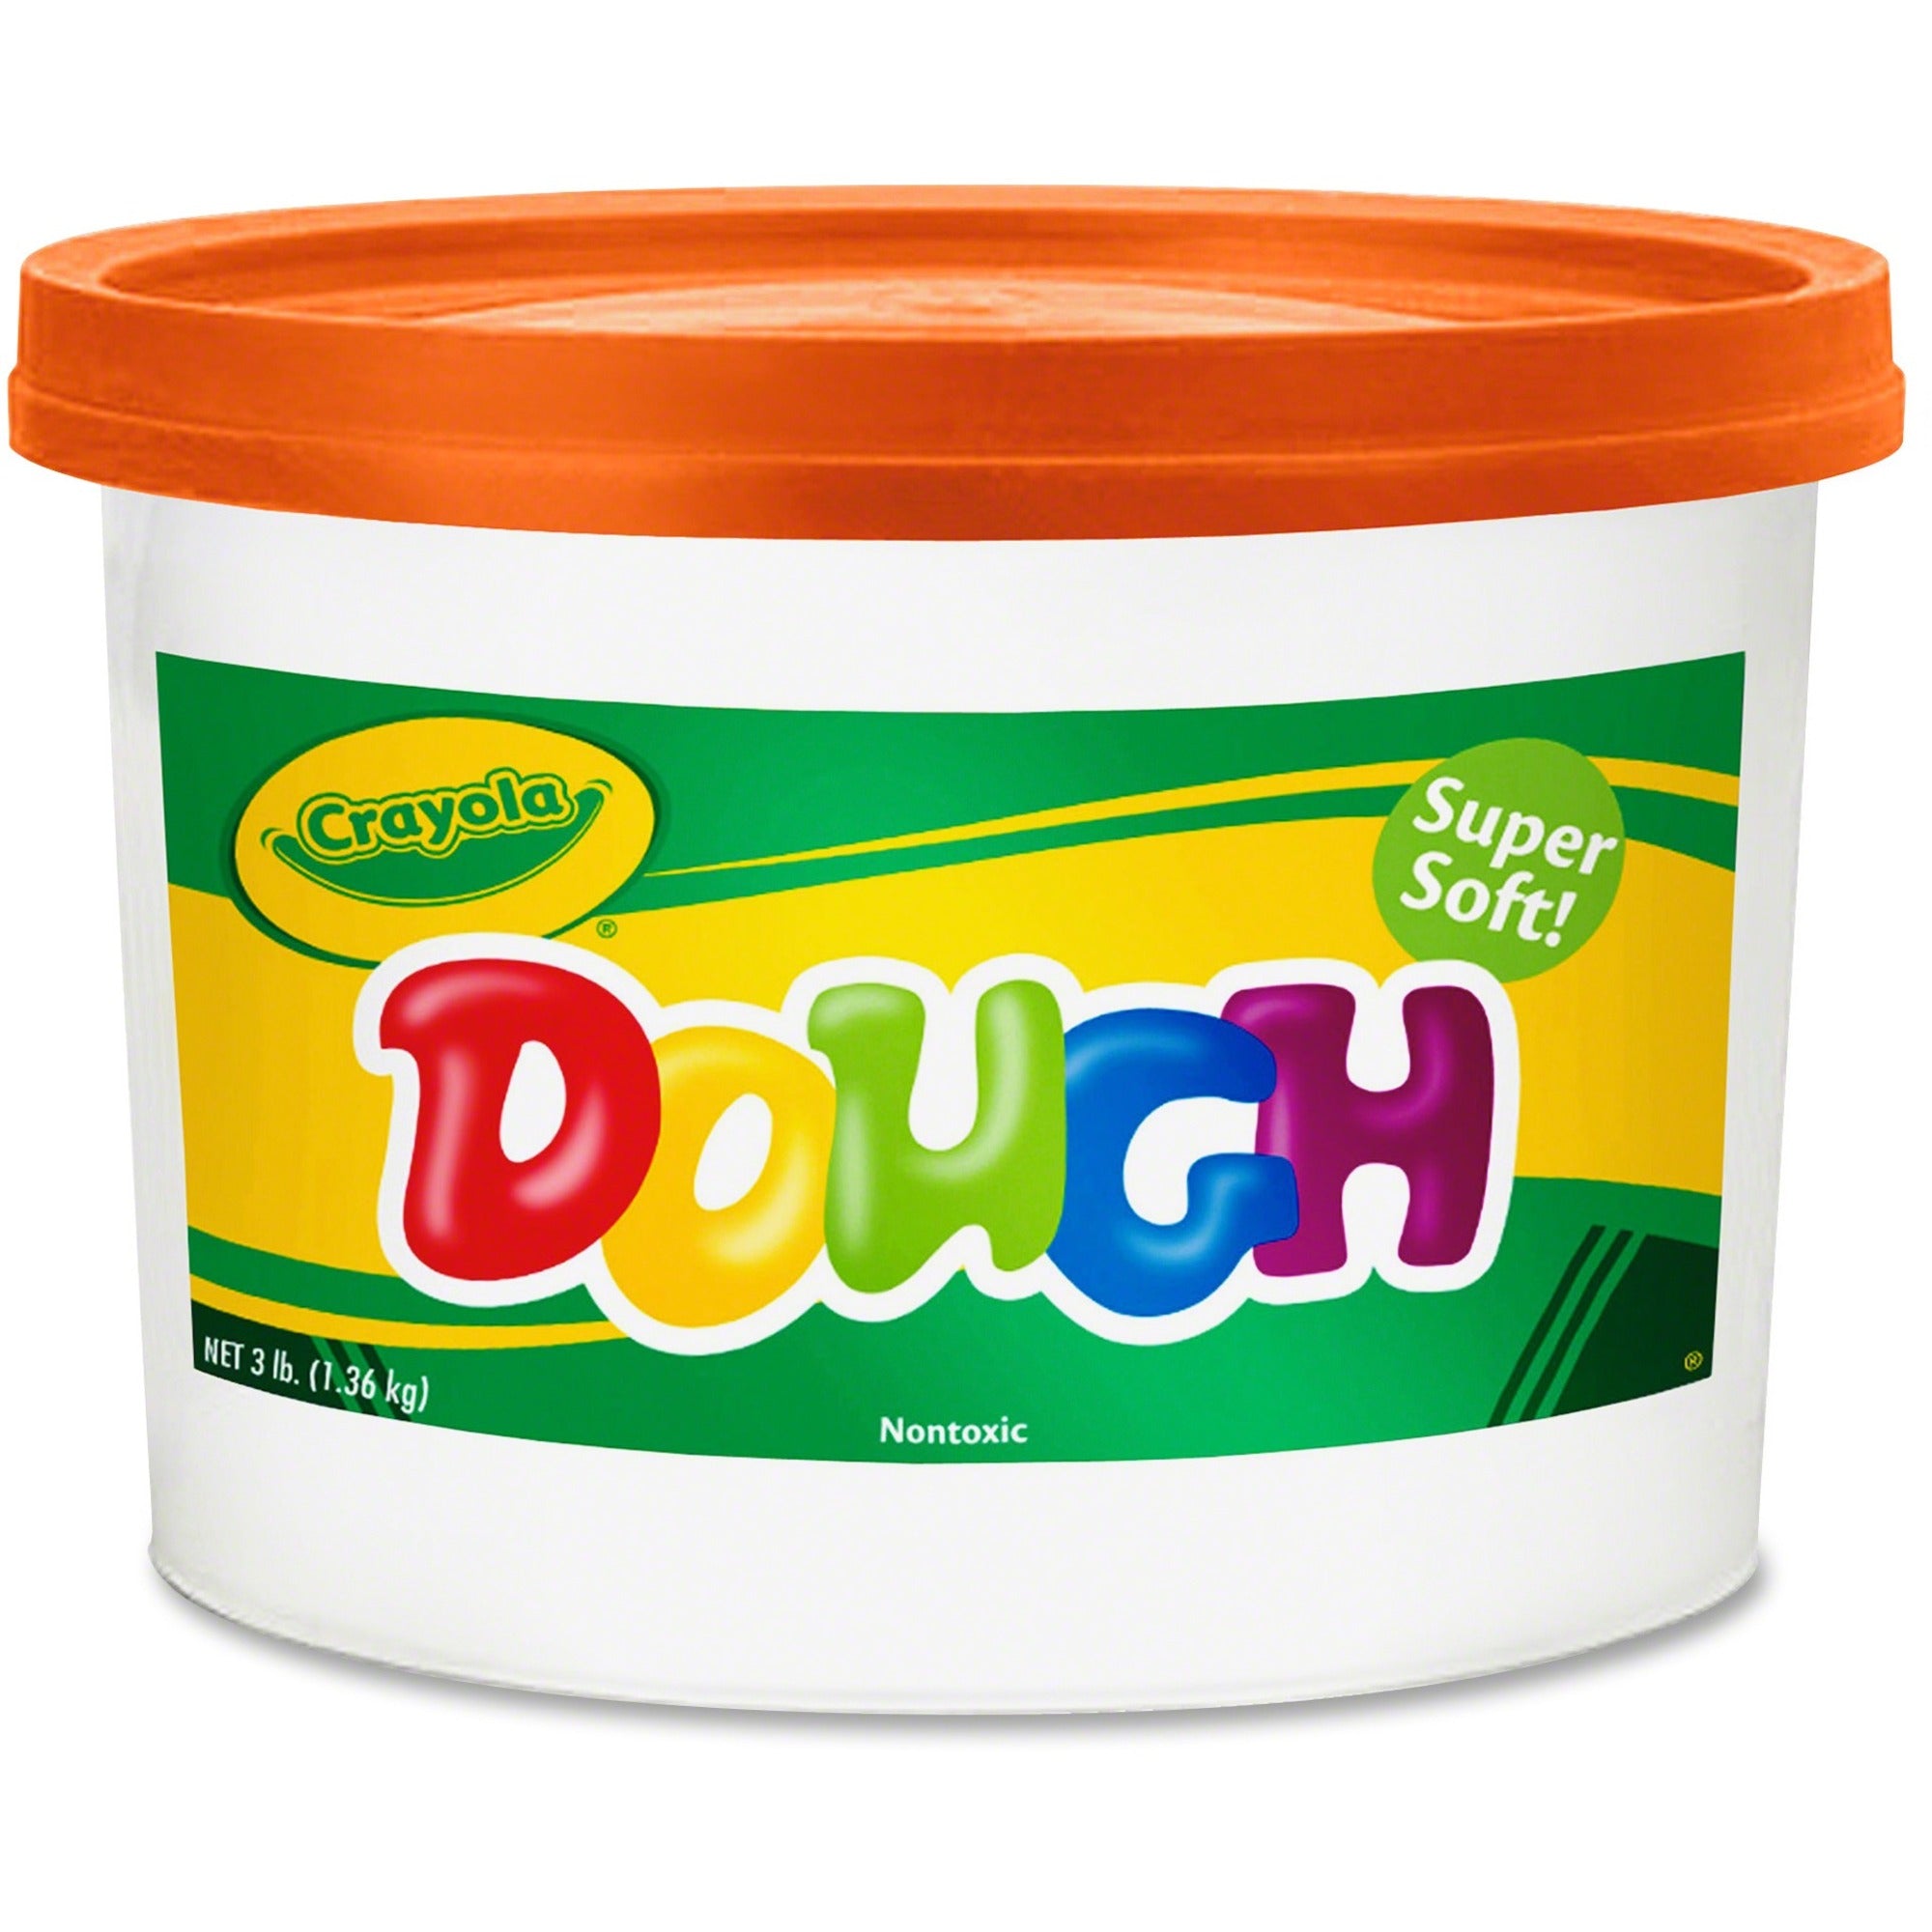 Crayola Super Soft Dough - Modeling, Fun and Learning, Painting and Drawing - 1 Each - Orange - 